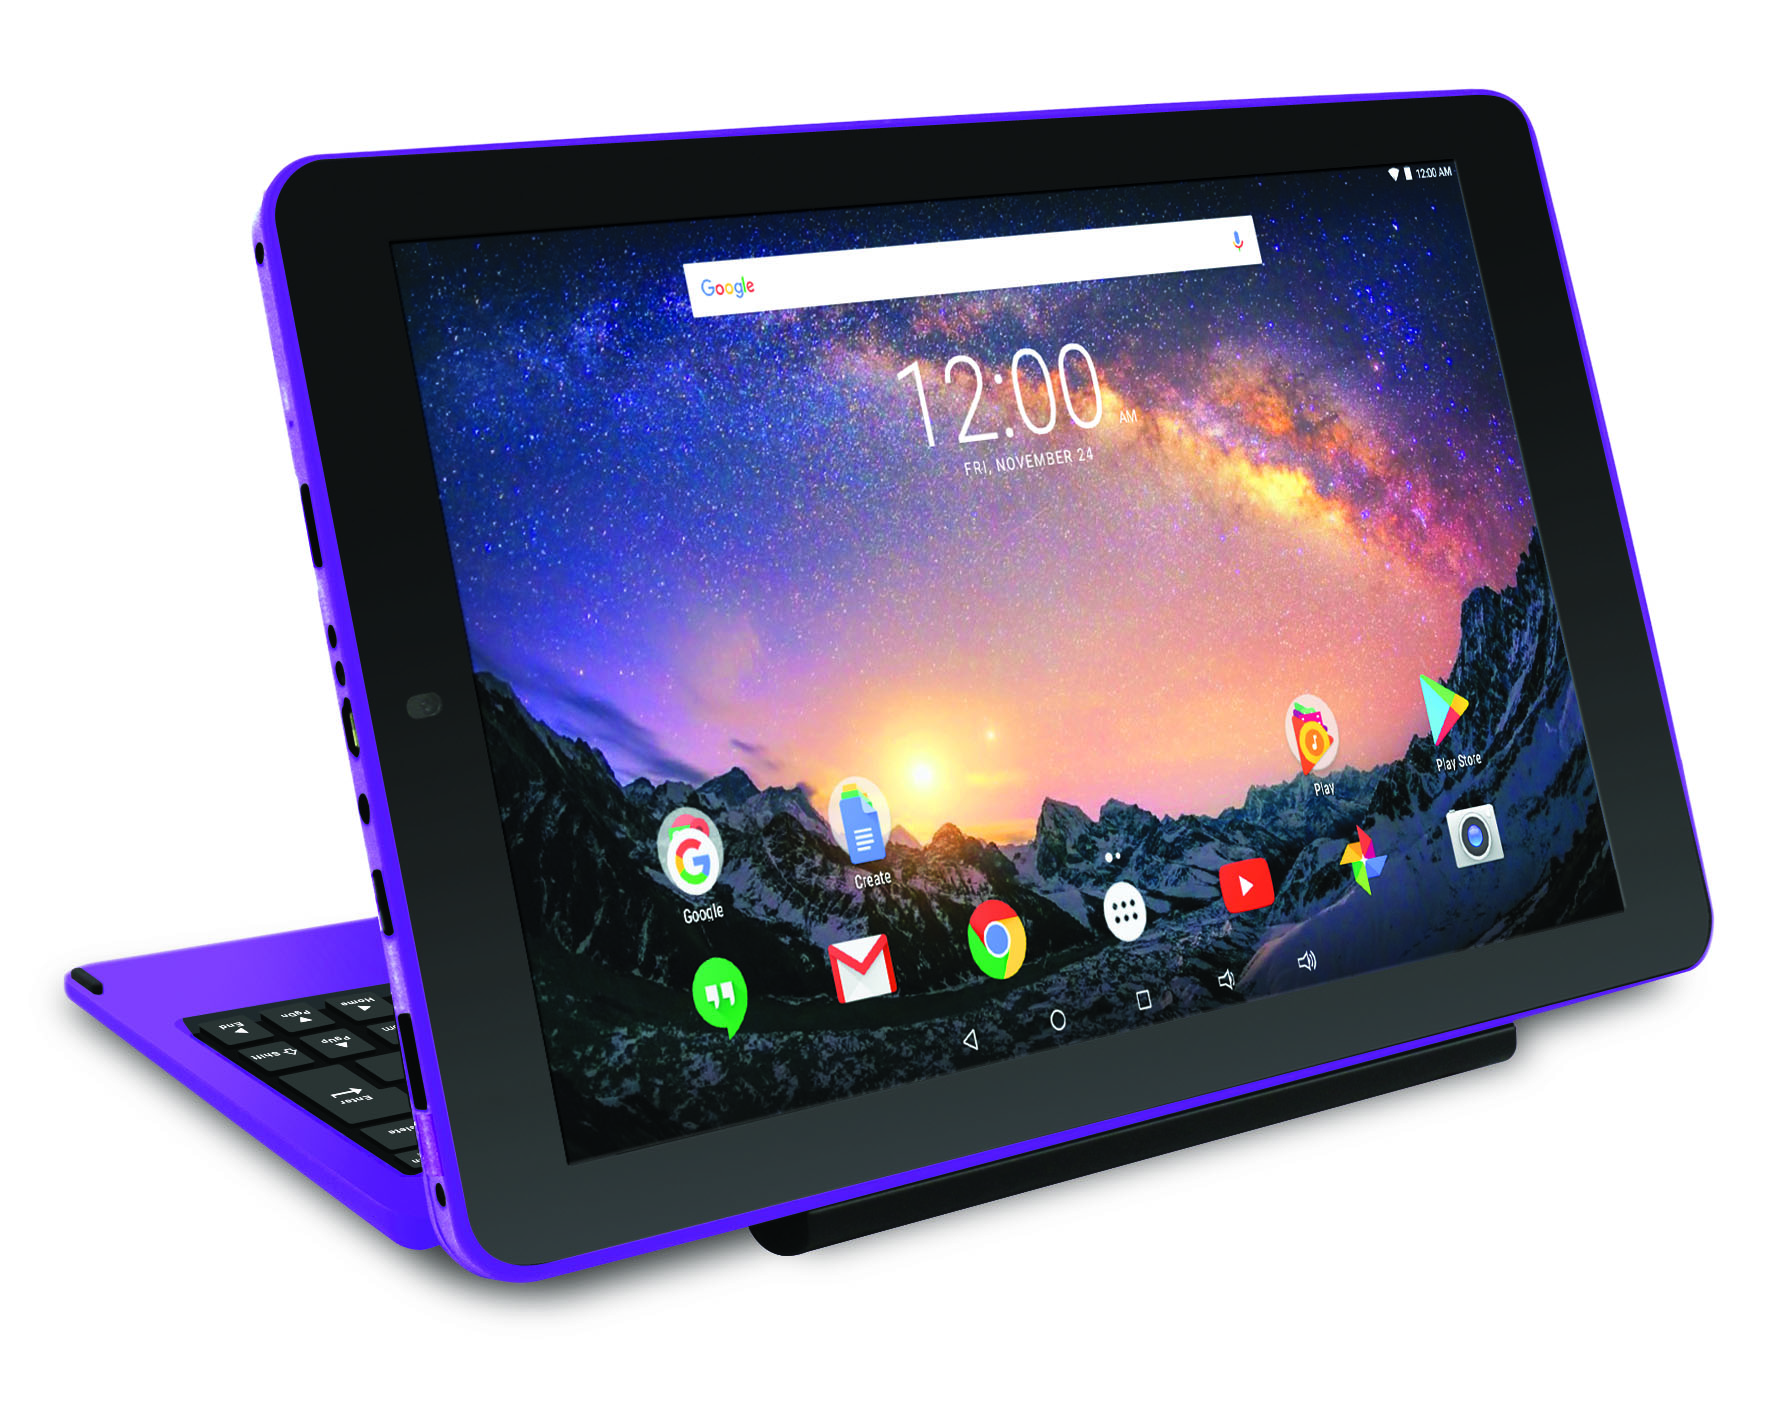 RCA Galileo Pro 11.5" 32GB 2-in-1 Tablet with Keyboard Case Android OS, Purple (Google Classroom Ready) - image 1 of 5